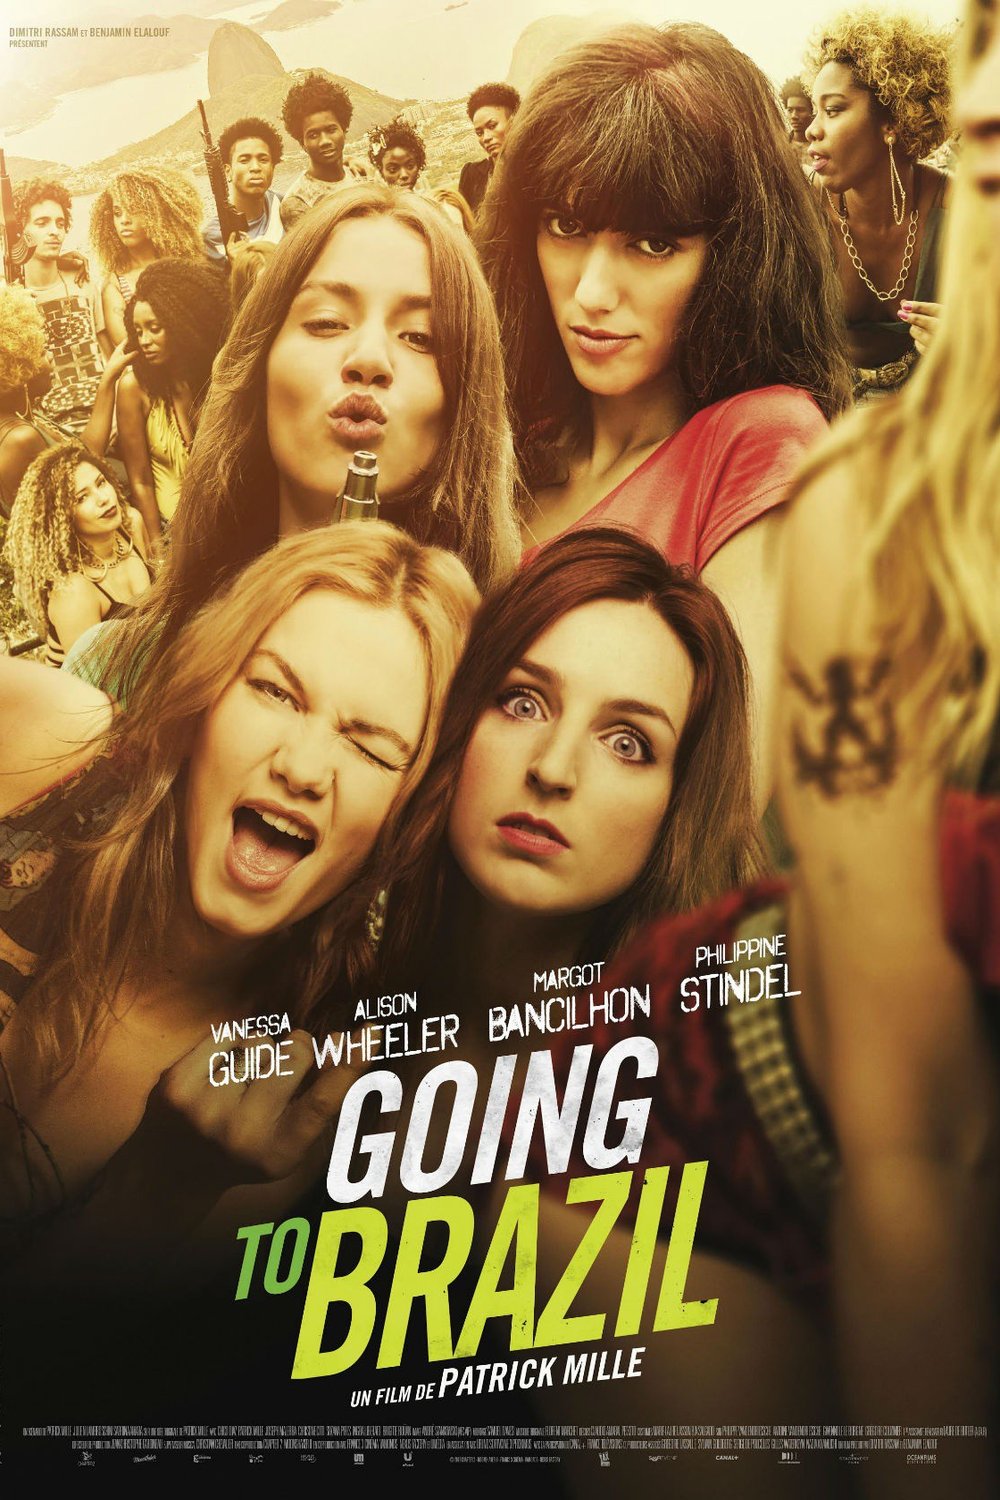 Poster of the movie Going to Brazil